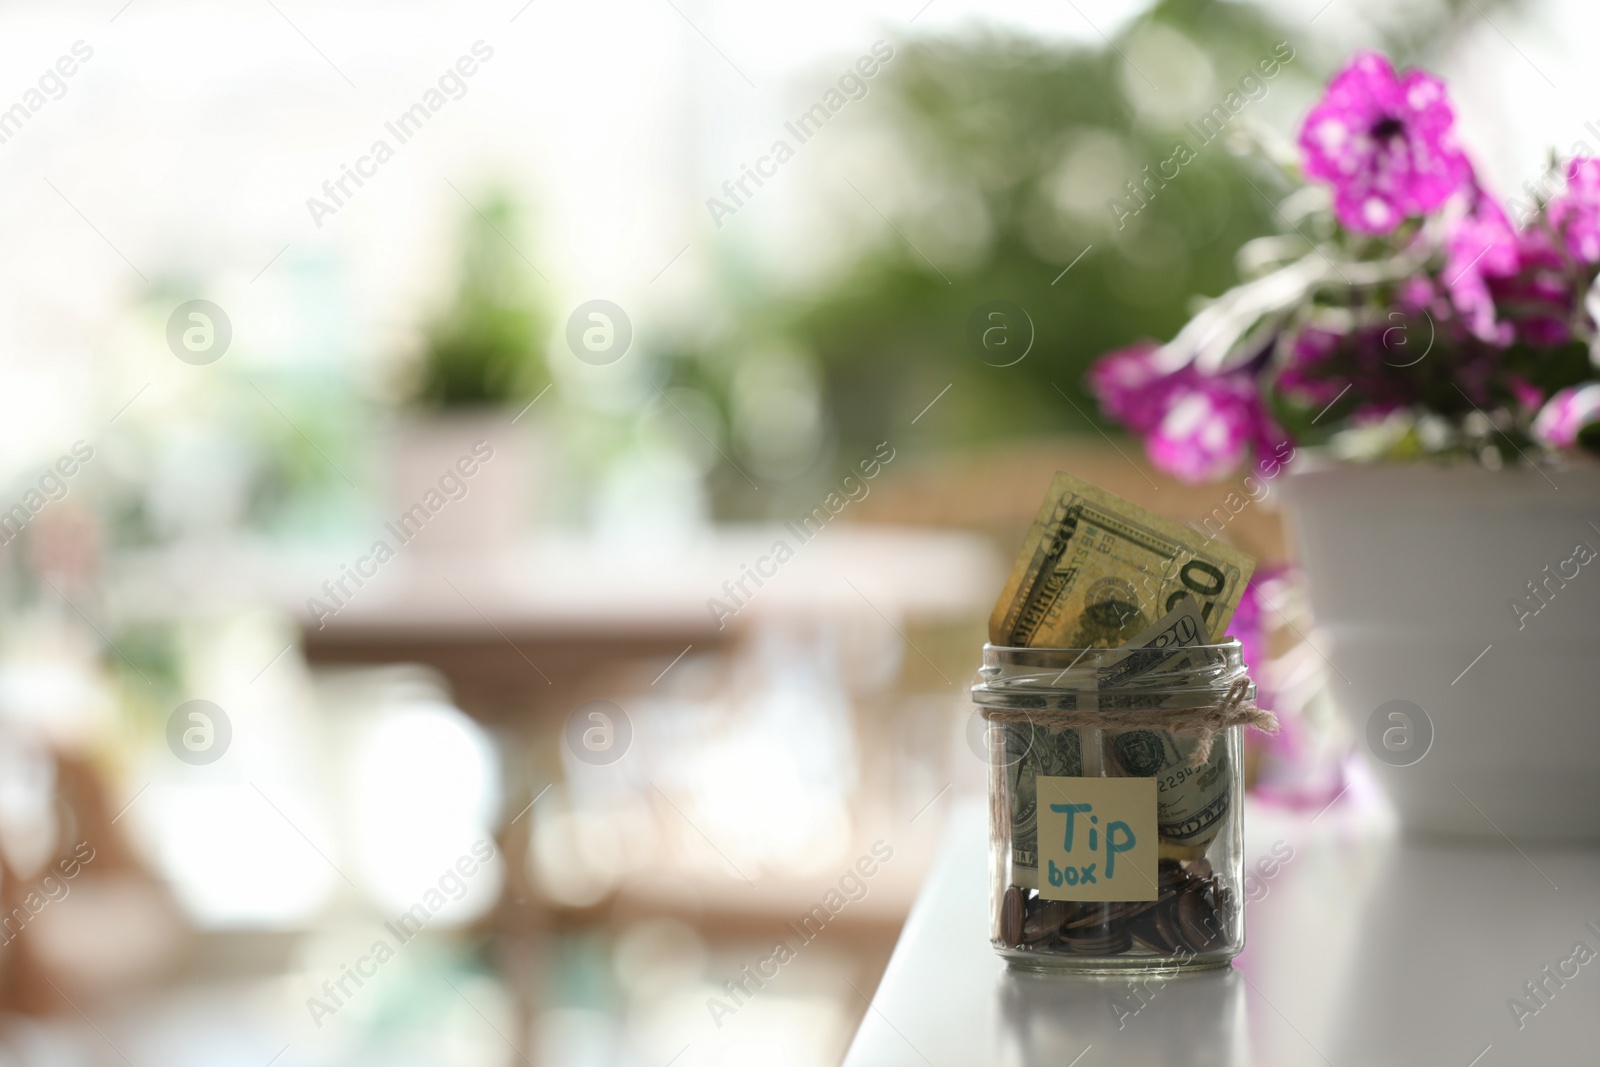 Photo of Glass jar with tips on table indoors. Space for text